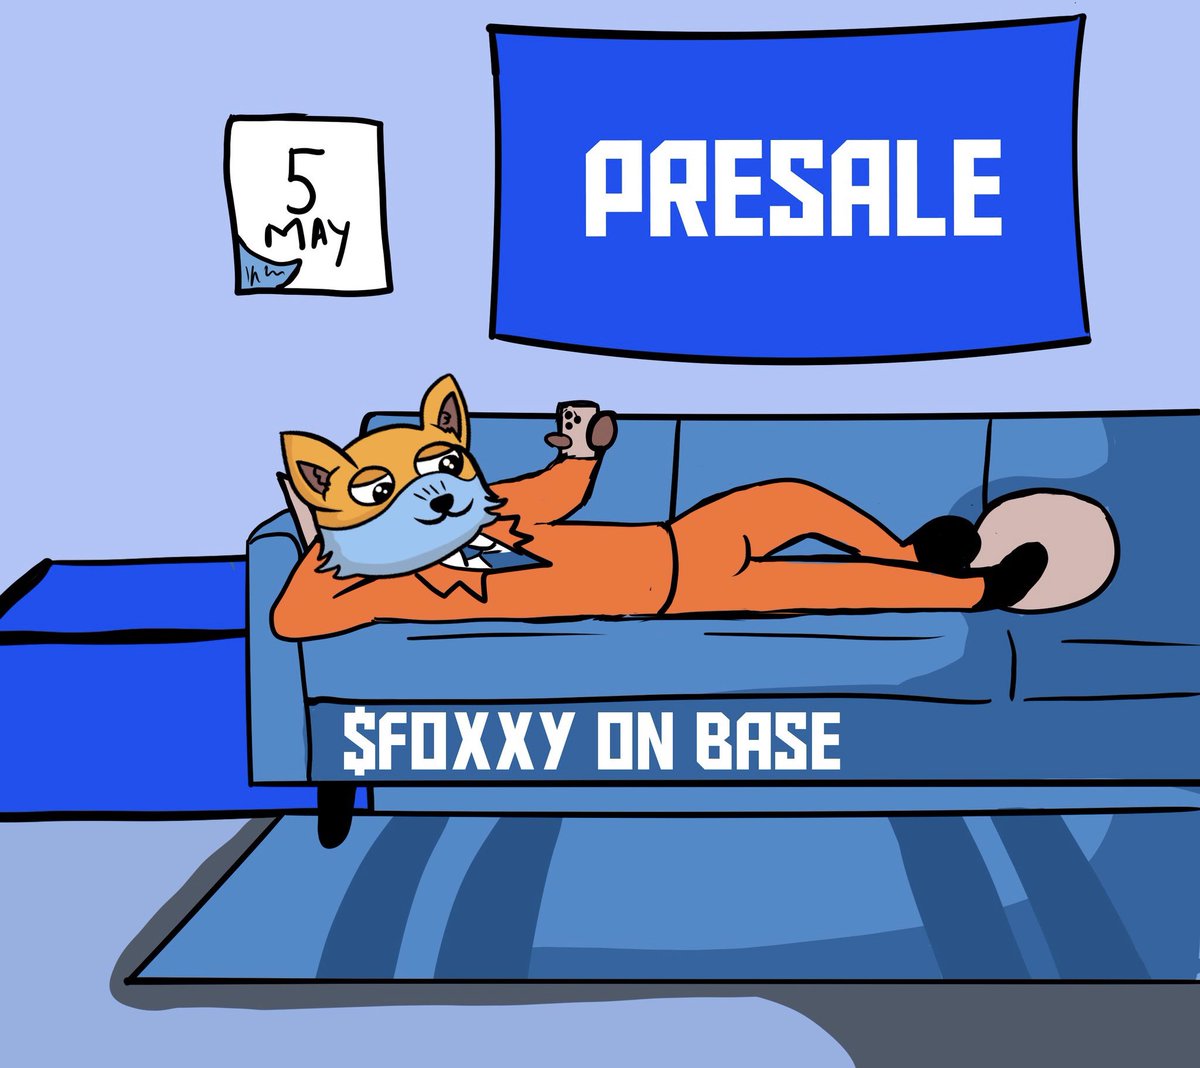 $500 • Worth $FOXXY Token (50k) 10 Days • ➖RT & Follow : @FoxxyOnBase 🦊 _________________________________ Presale starts 5th May Live on Uniswap on May 9th Listing price around 0.01 🚀 Winner paid in 50000 $FOXXY Tokens (Around $500)